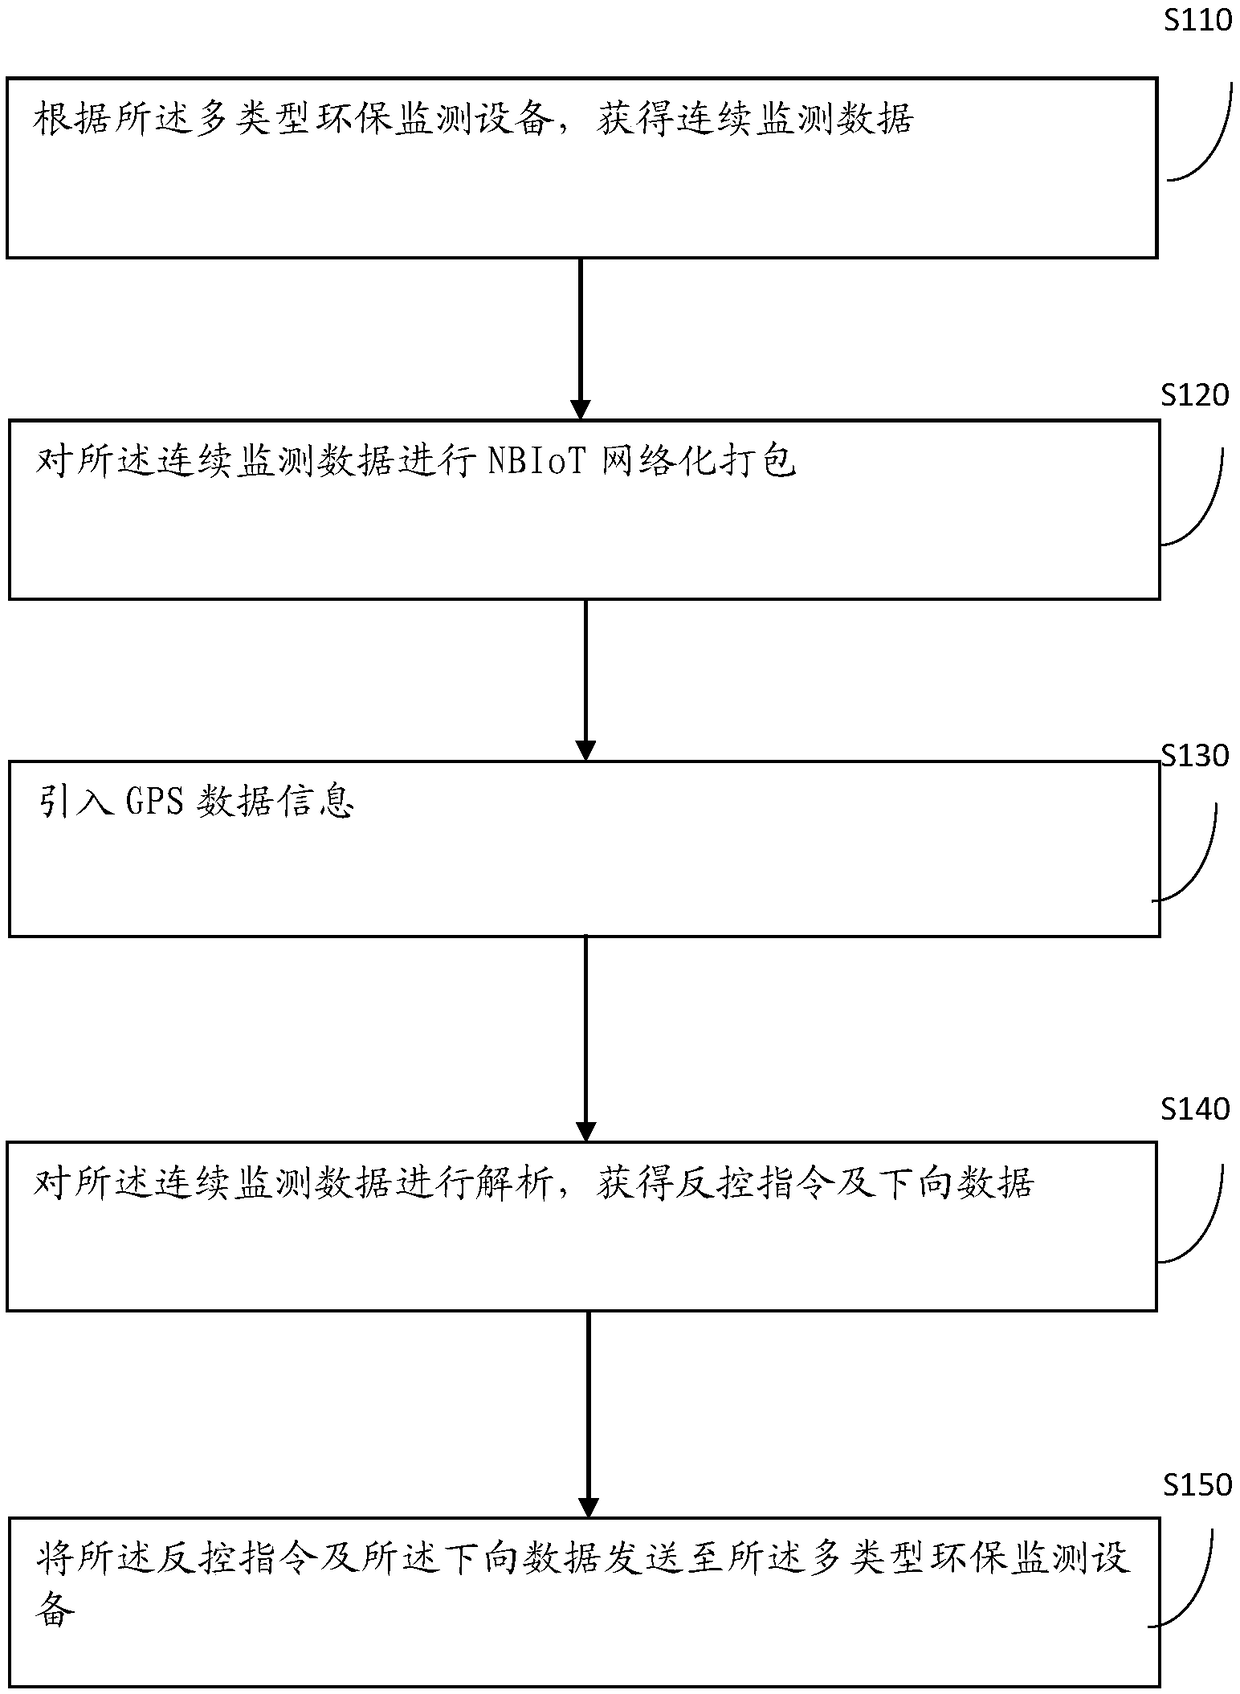 Universal NBIoT network information processing method and device